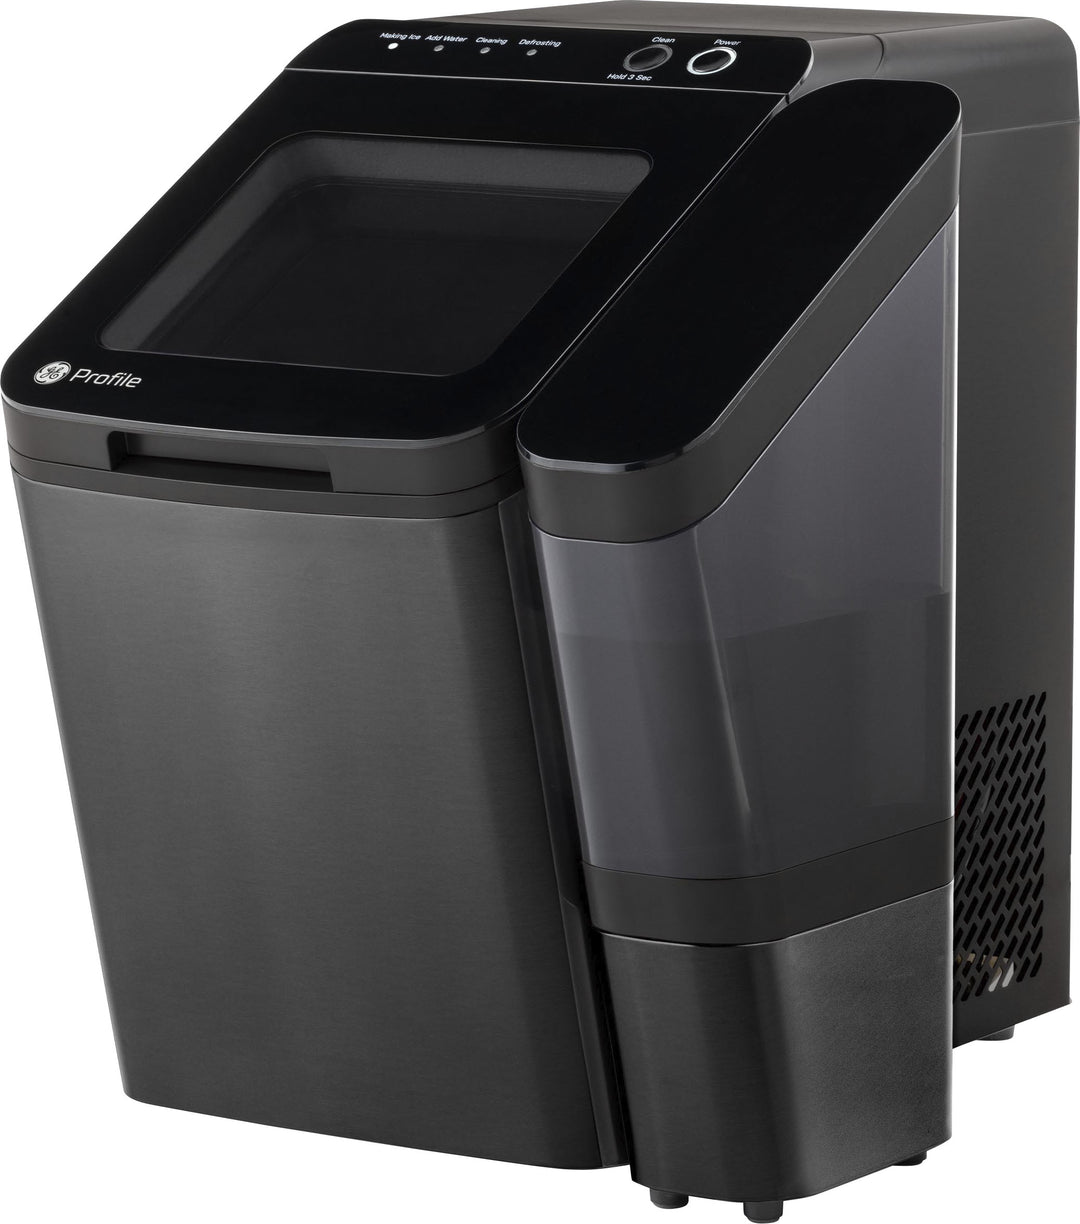 GE Profile - Opal 1.0 Nugget Ice Maker With Side Tank - Black_2